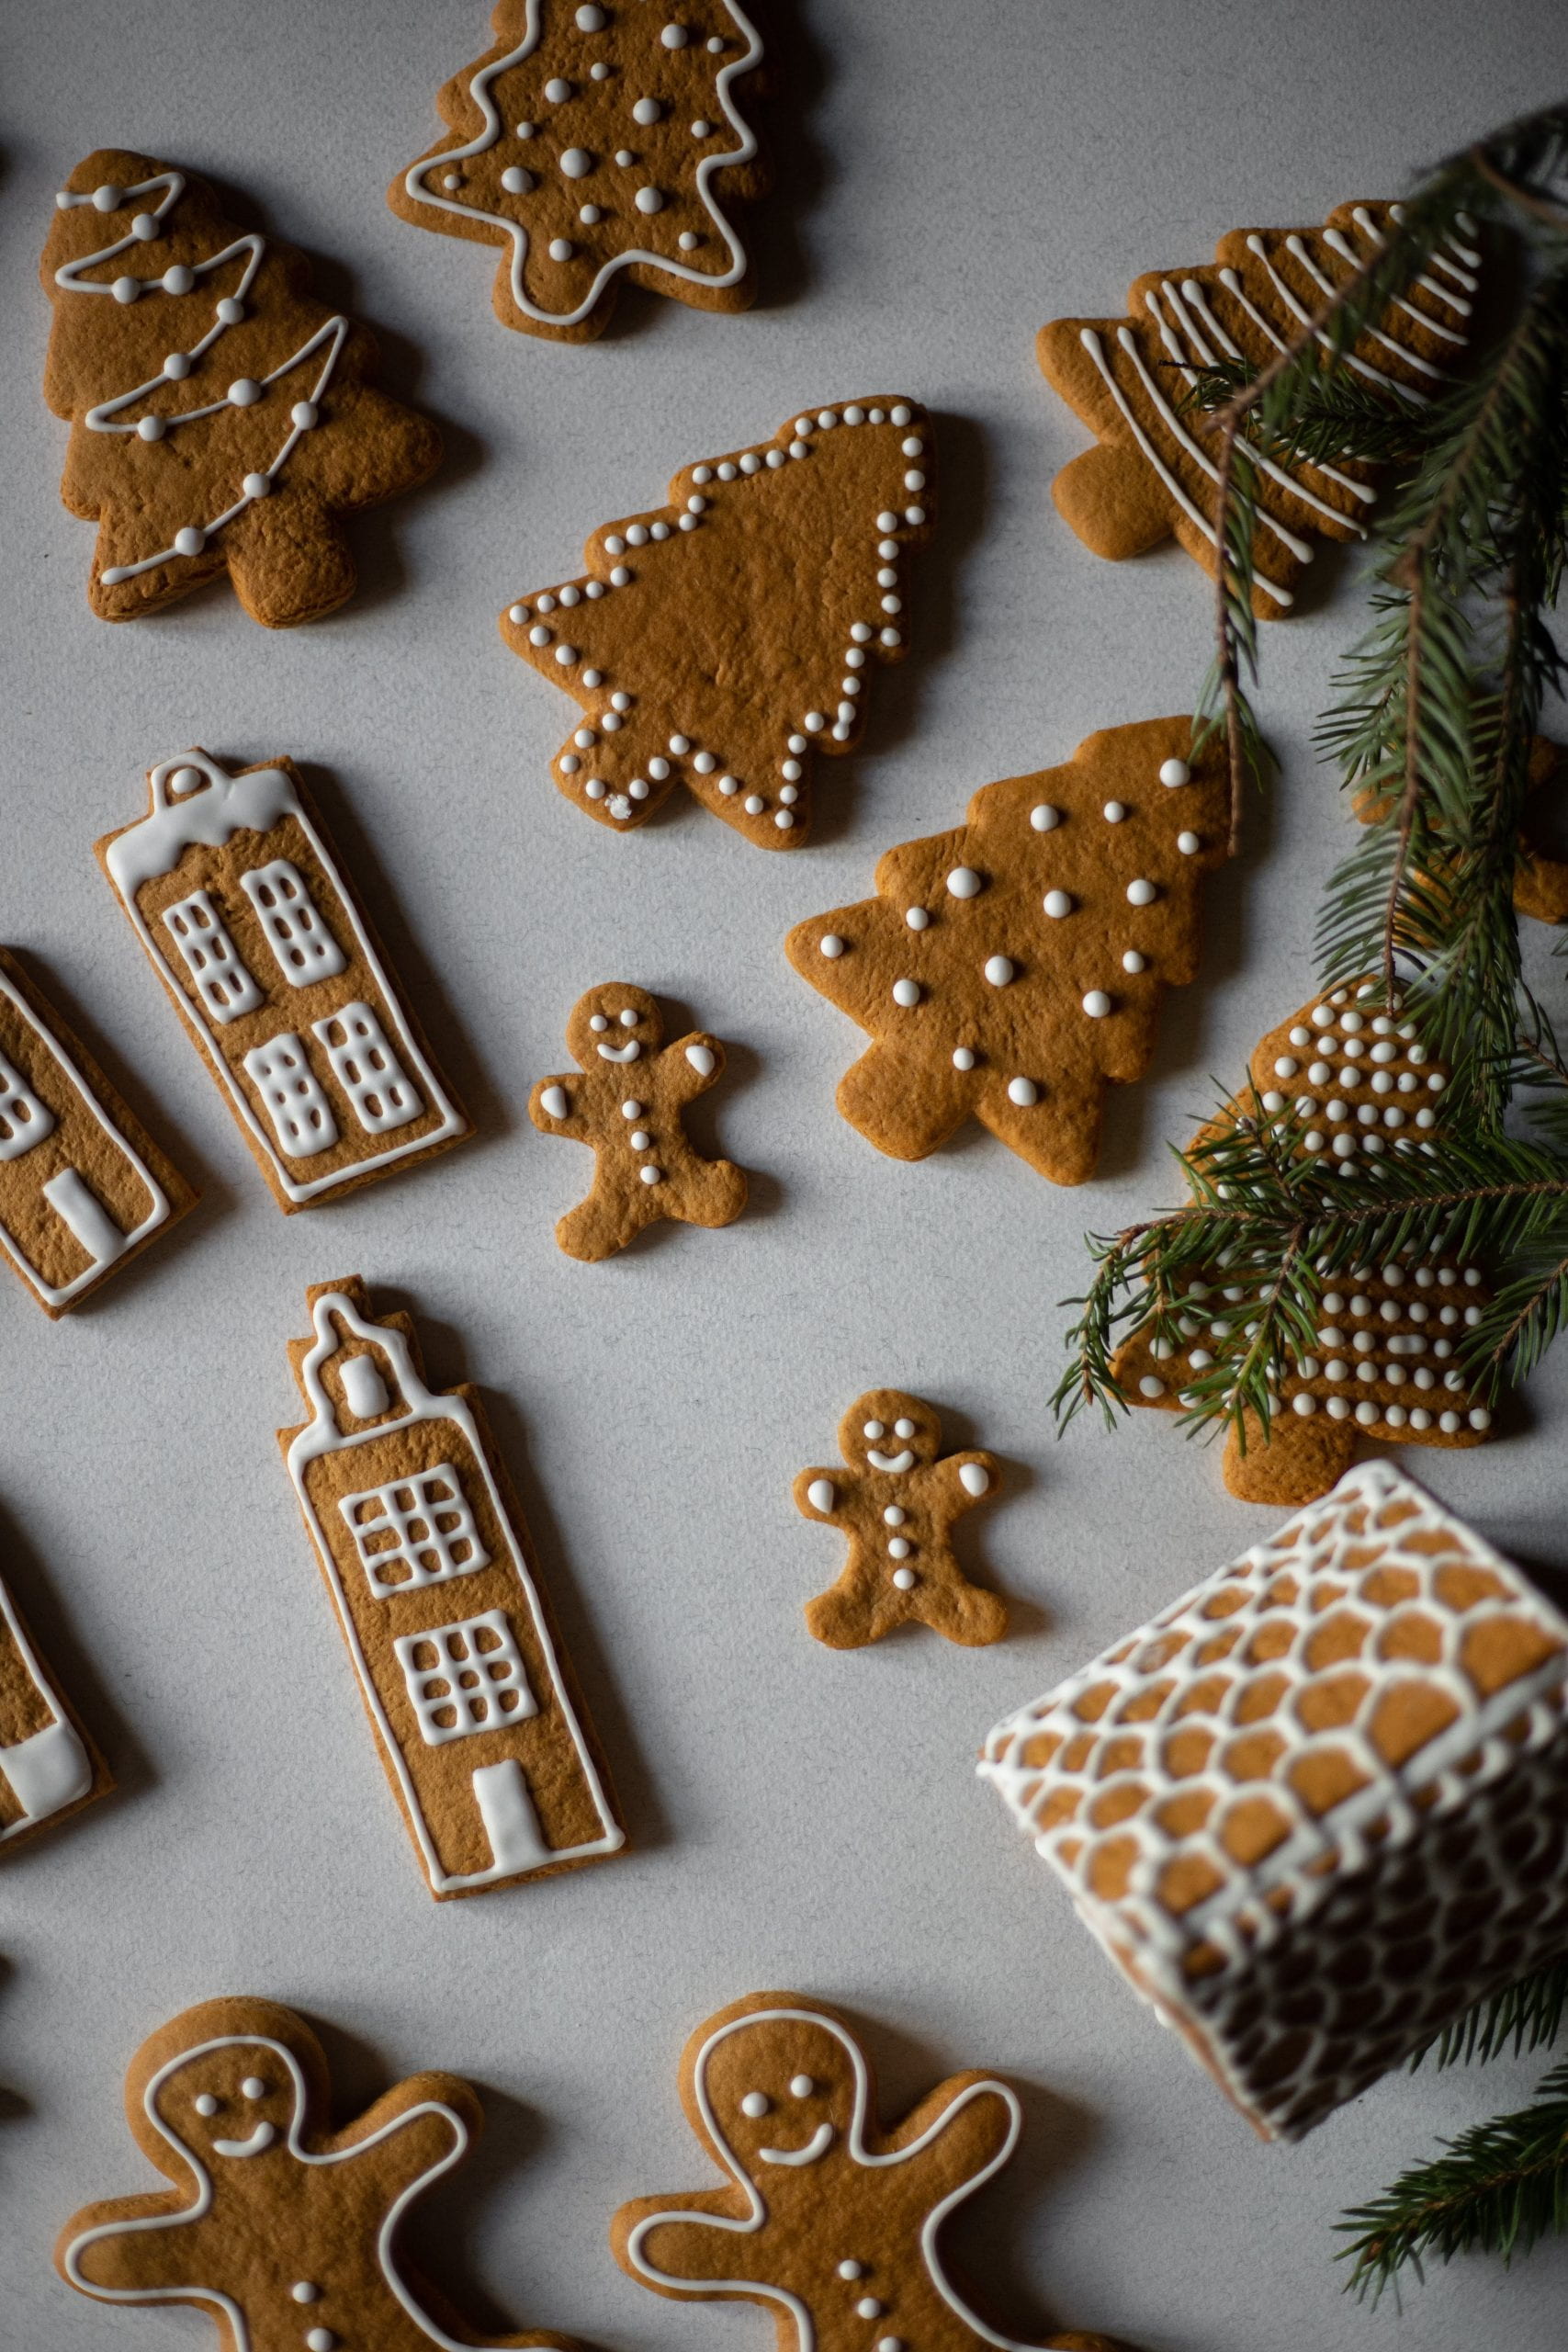 gingerbread men and trees with icing on them